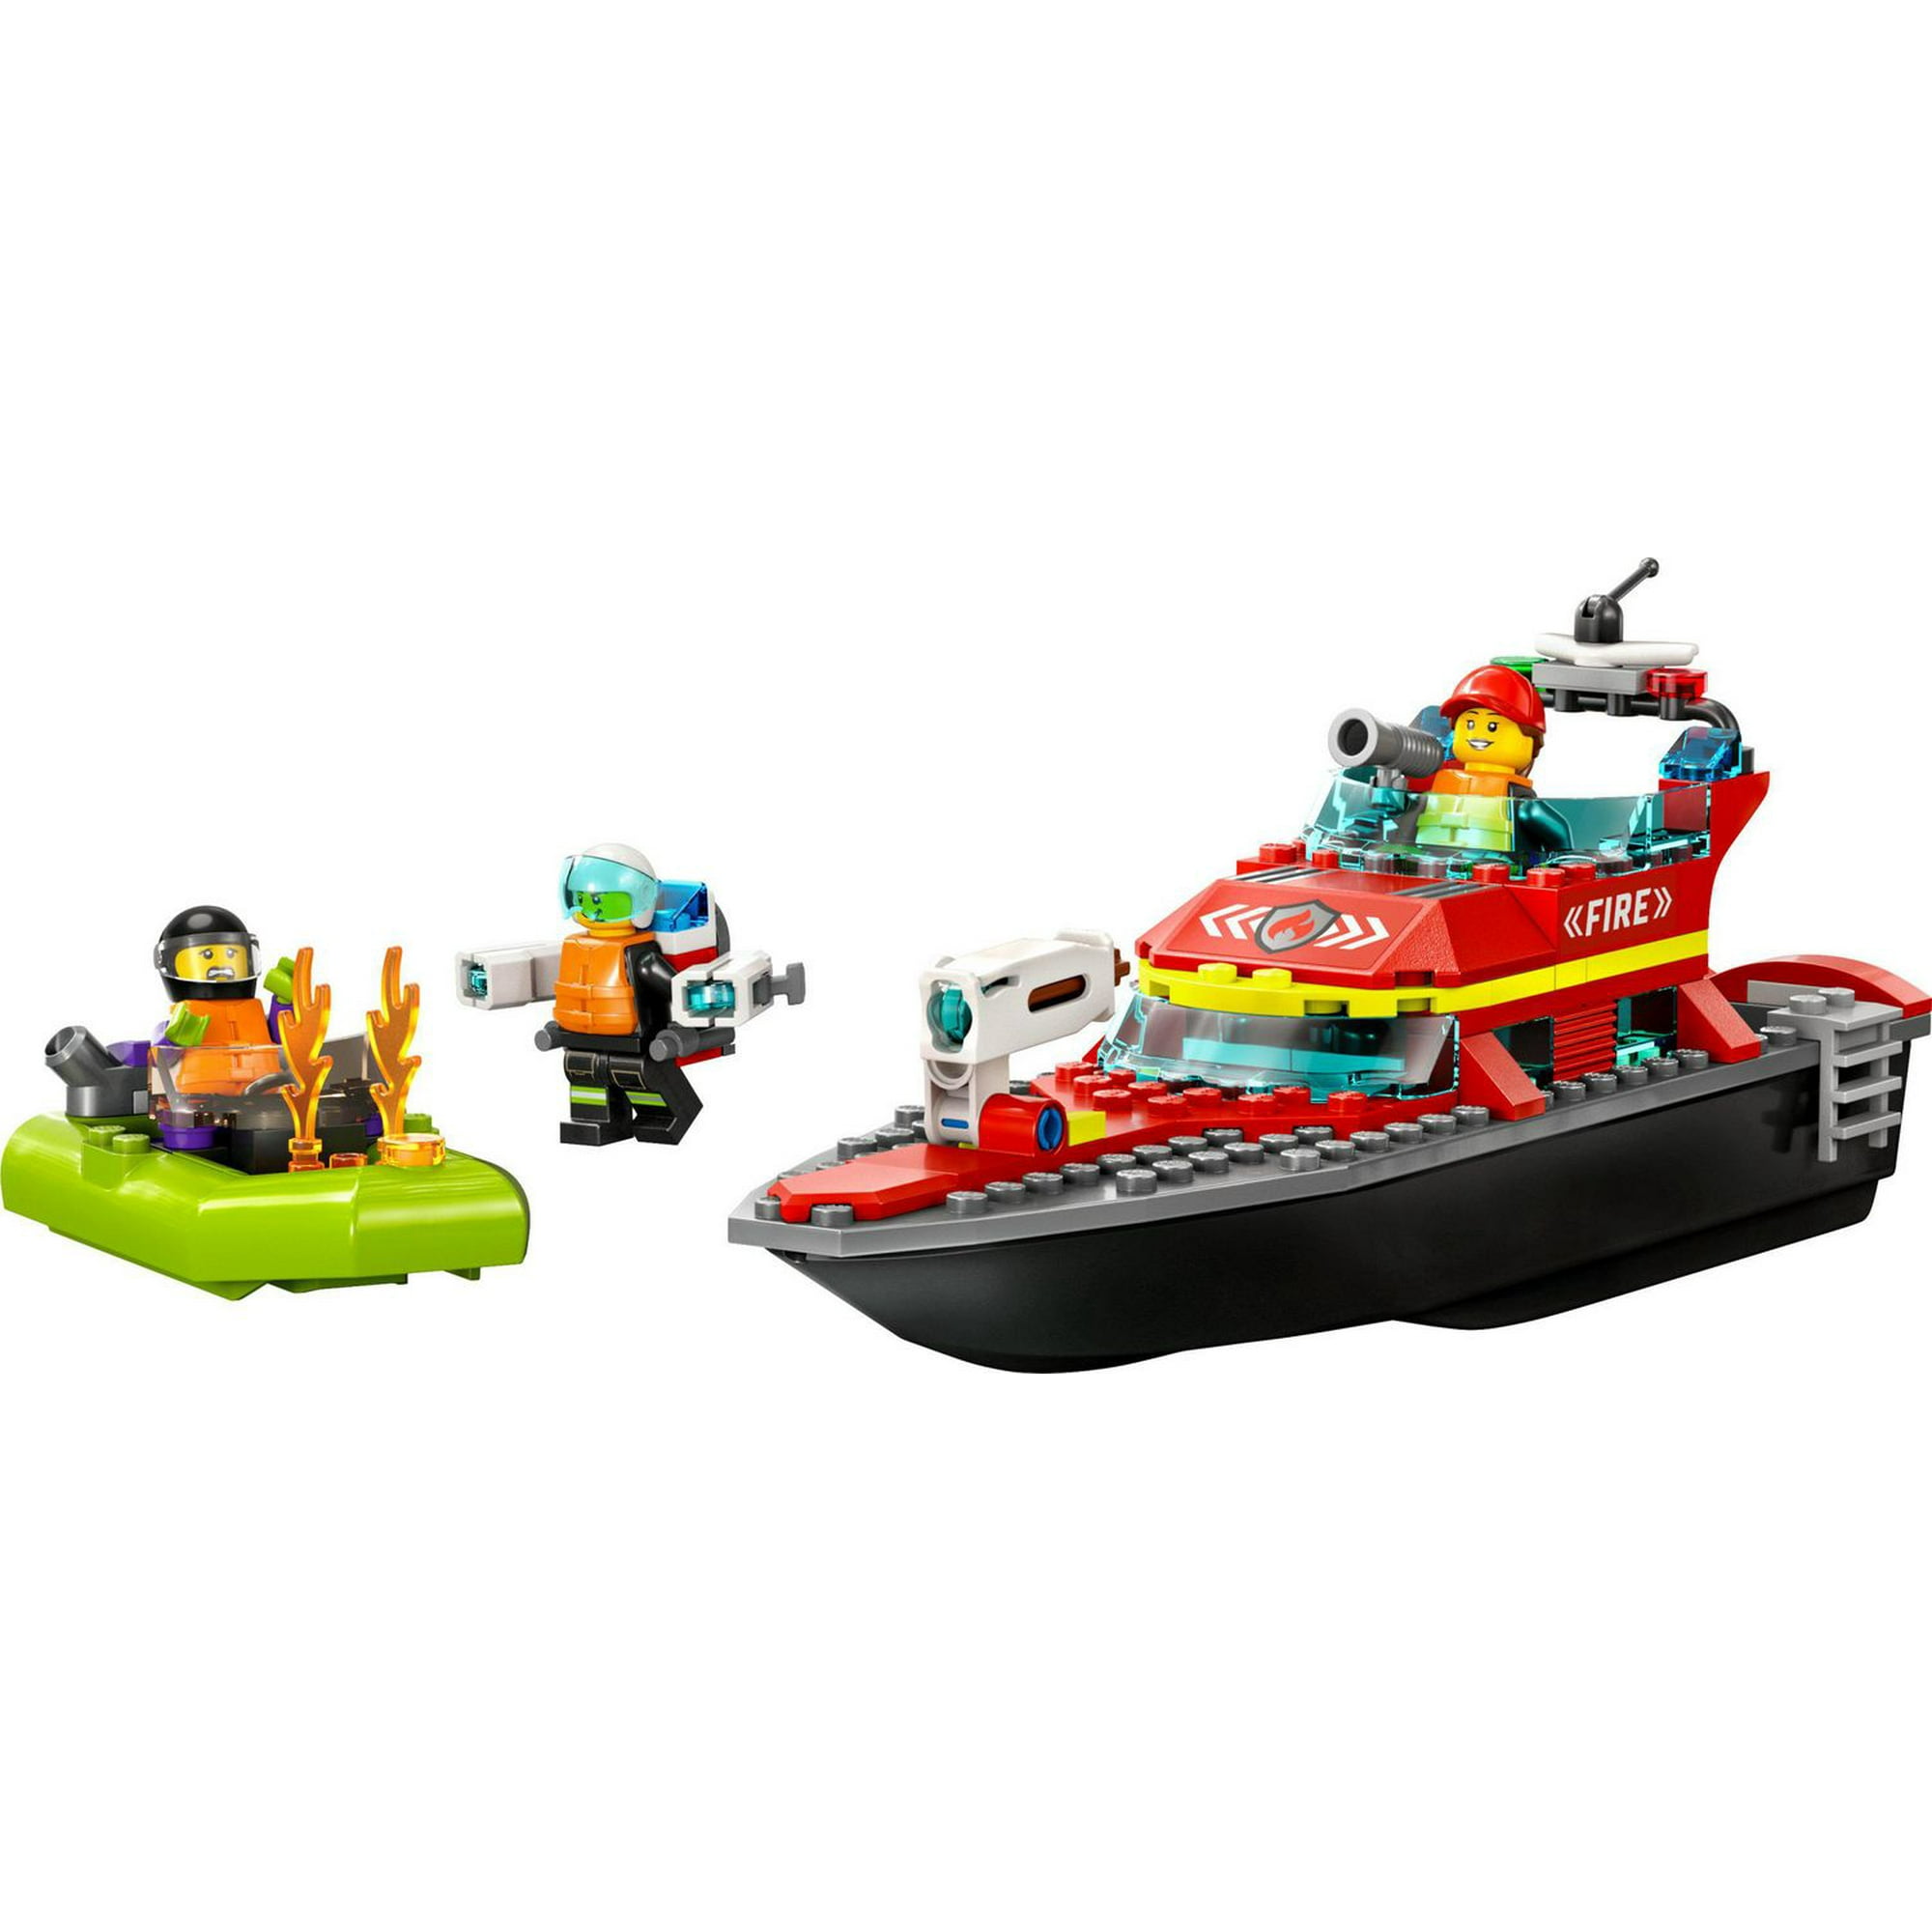 LEGO City Fire Rescue Boat 60373 Toy Boat that Floats on Water for  Imagination Play, Building Toy for Kids Ages 5+, Includes 144 Pieces, Ages  5+ 